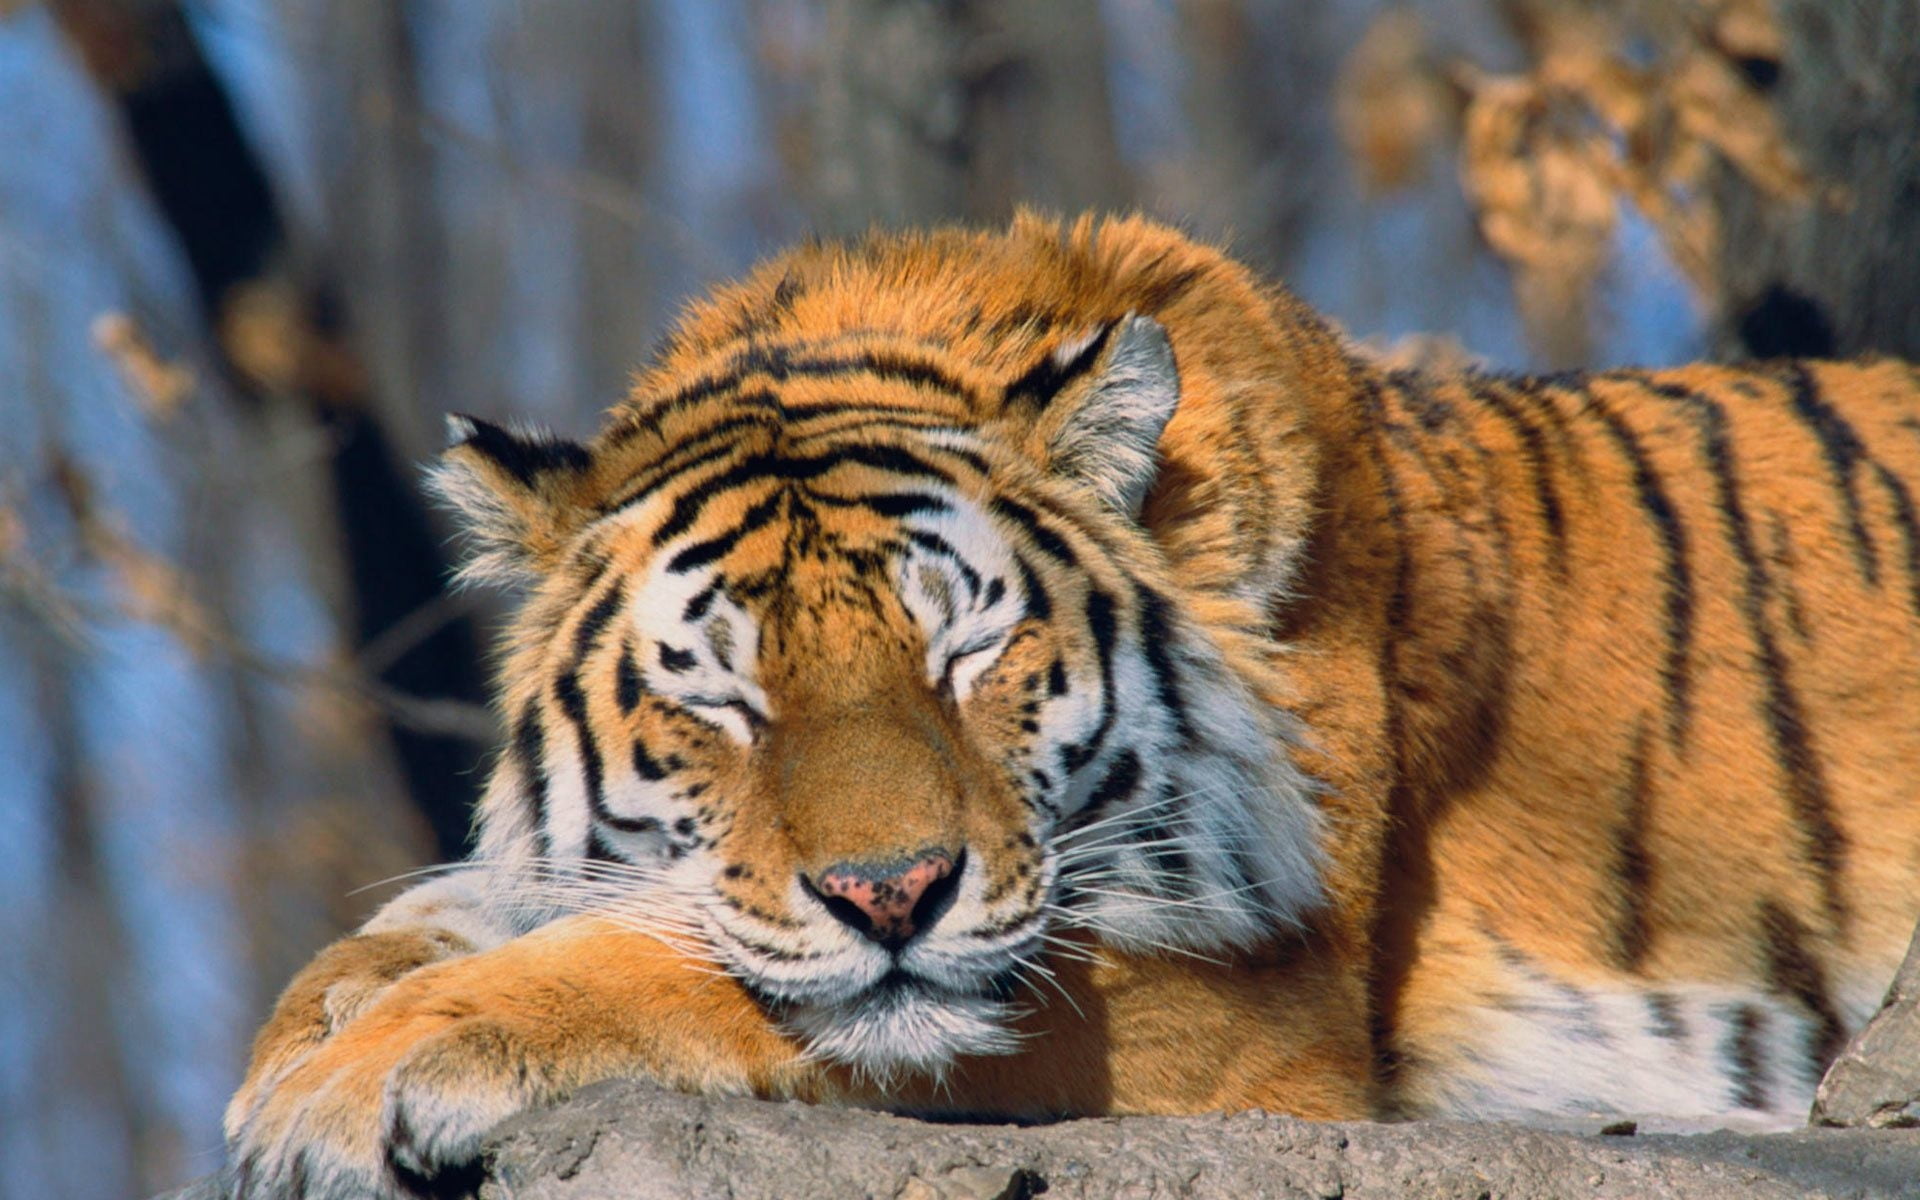 shallow focus photo of white, black, and brown tiger